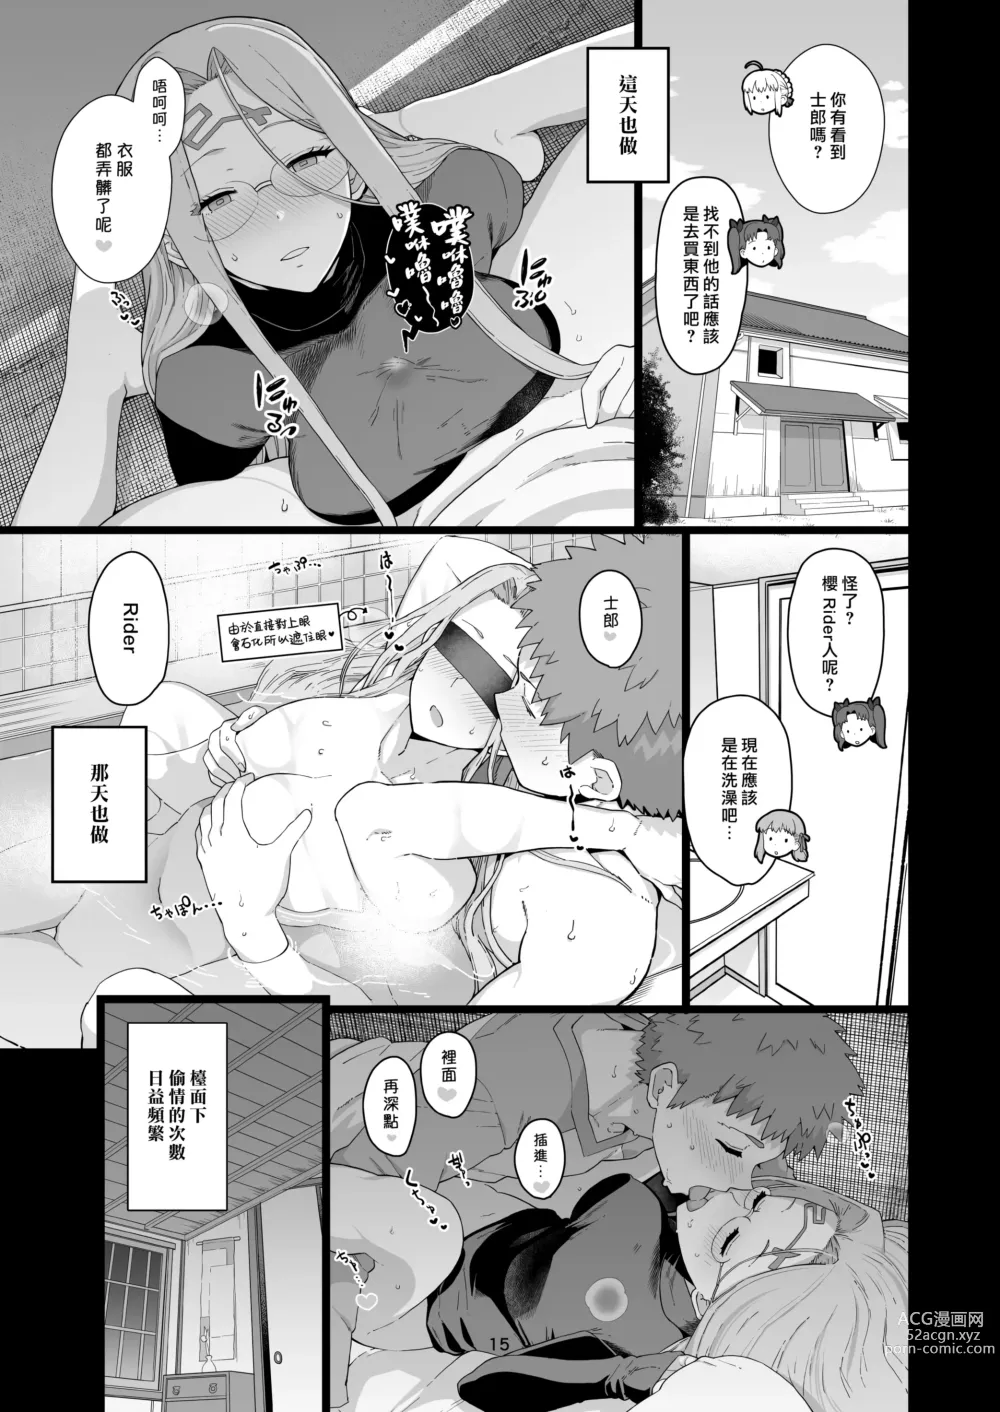 Page 18 of doujinshi Rider小姐的偷吃 (decensored)